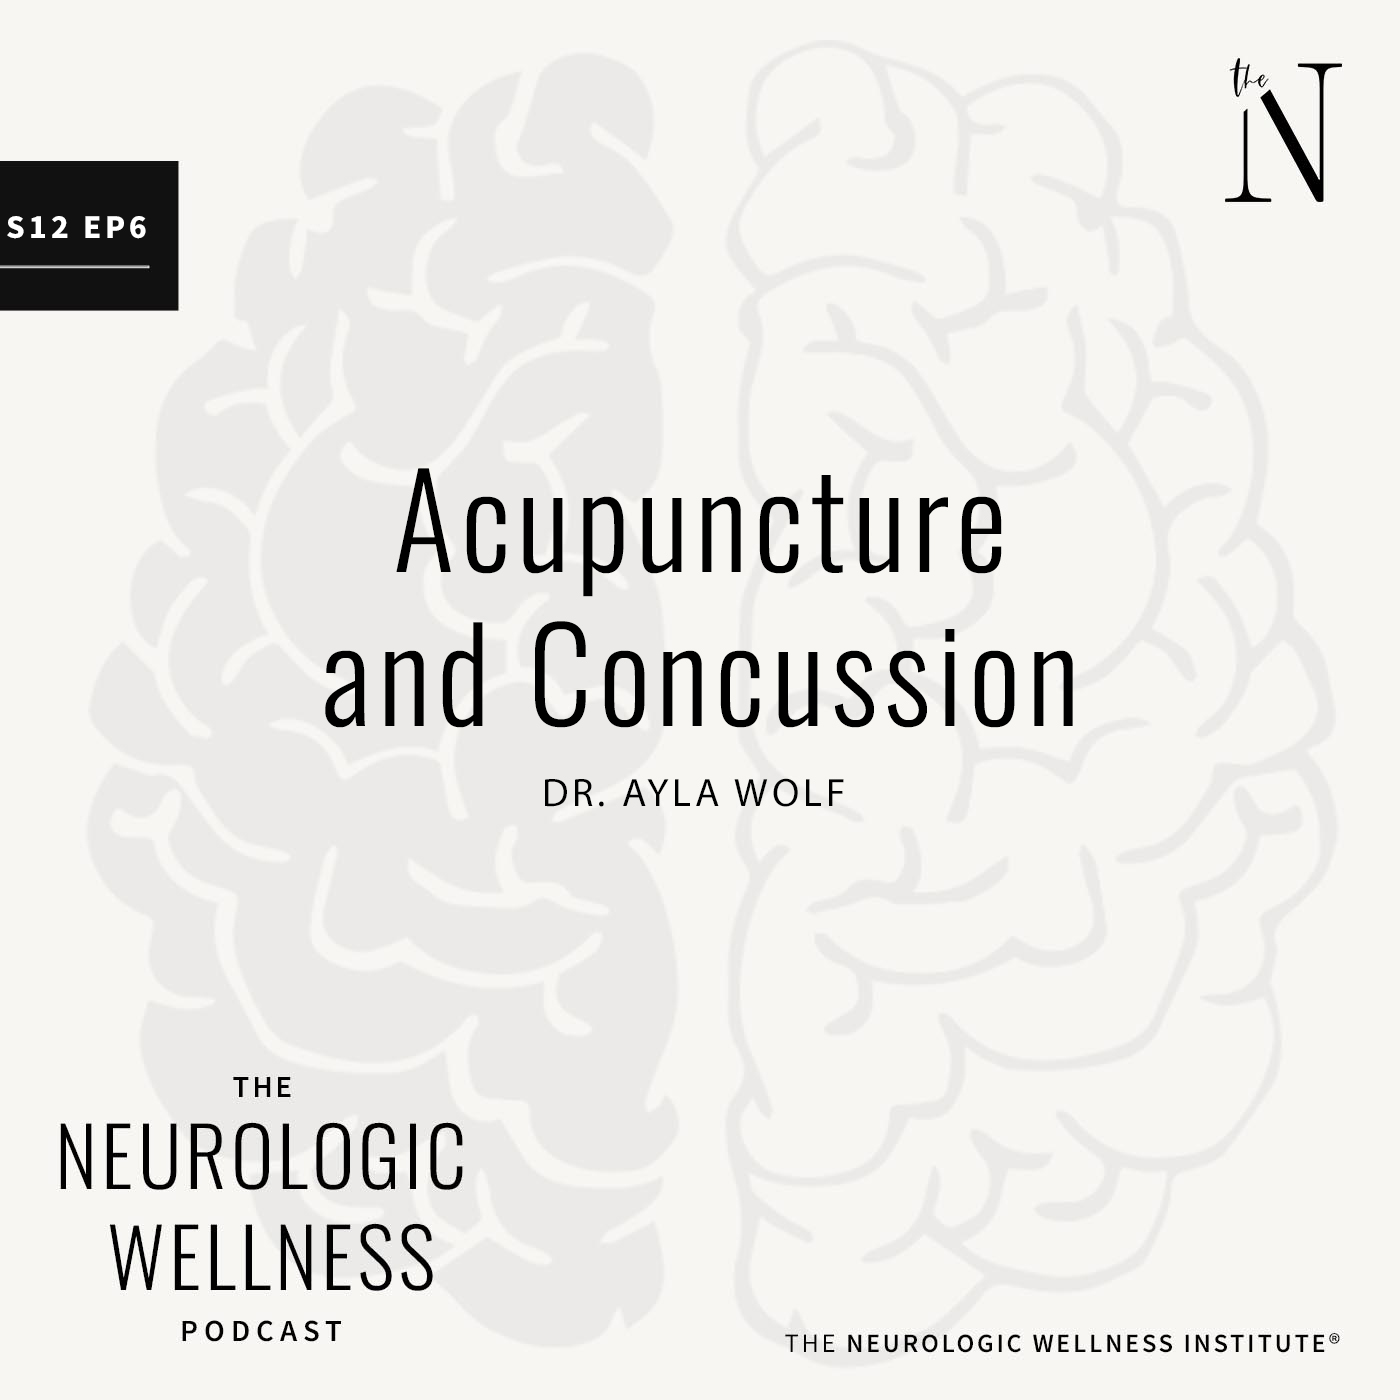 Acupuncture and Concussion